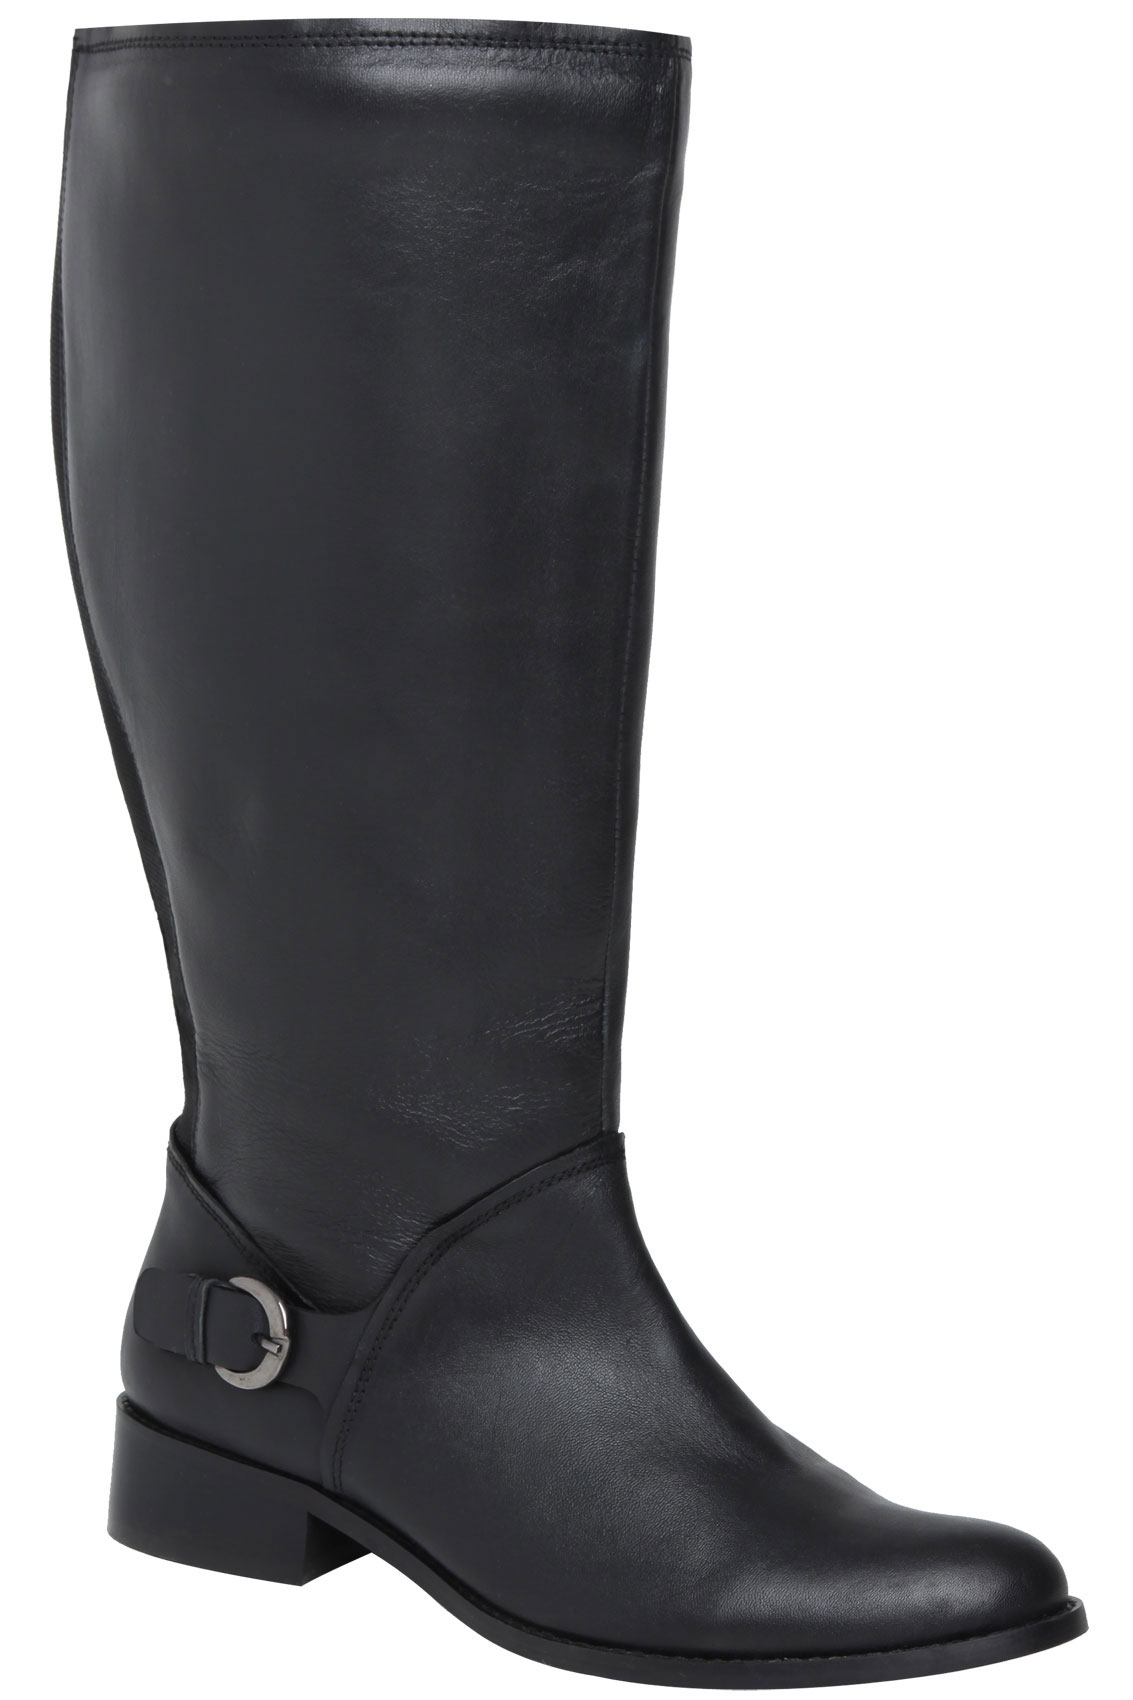 Black Leather Knee High Riding Boots With Buckle Trim & XXL Ca In EEE ...